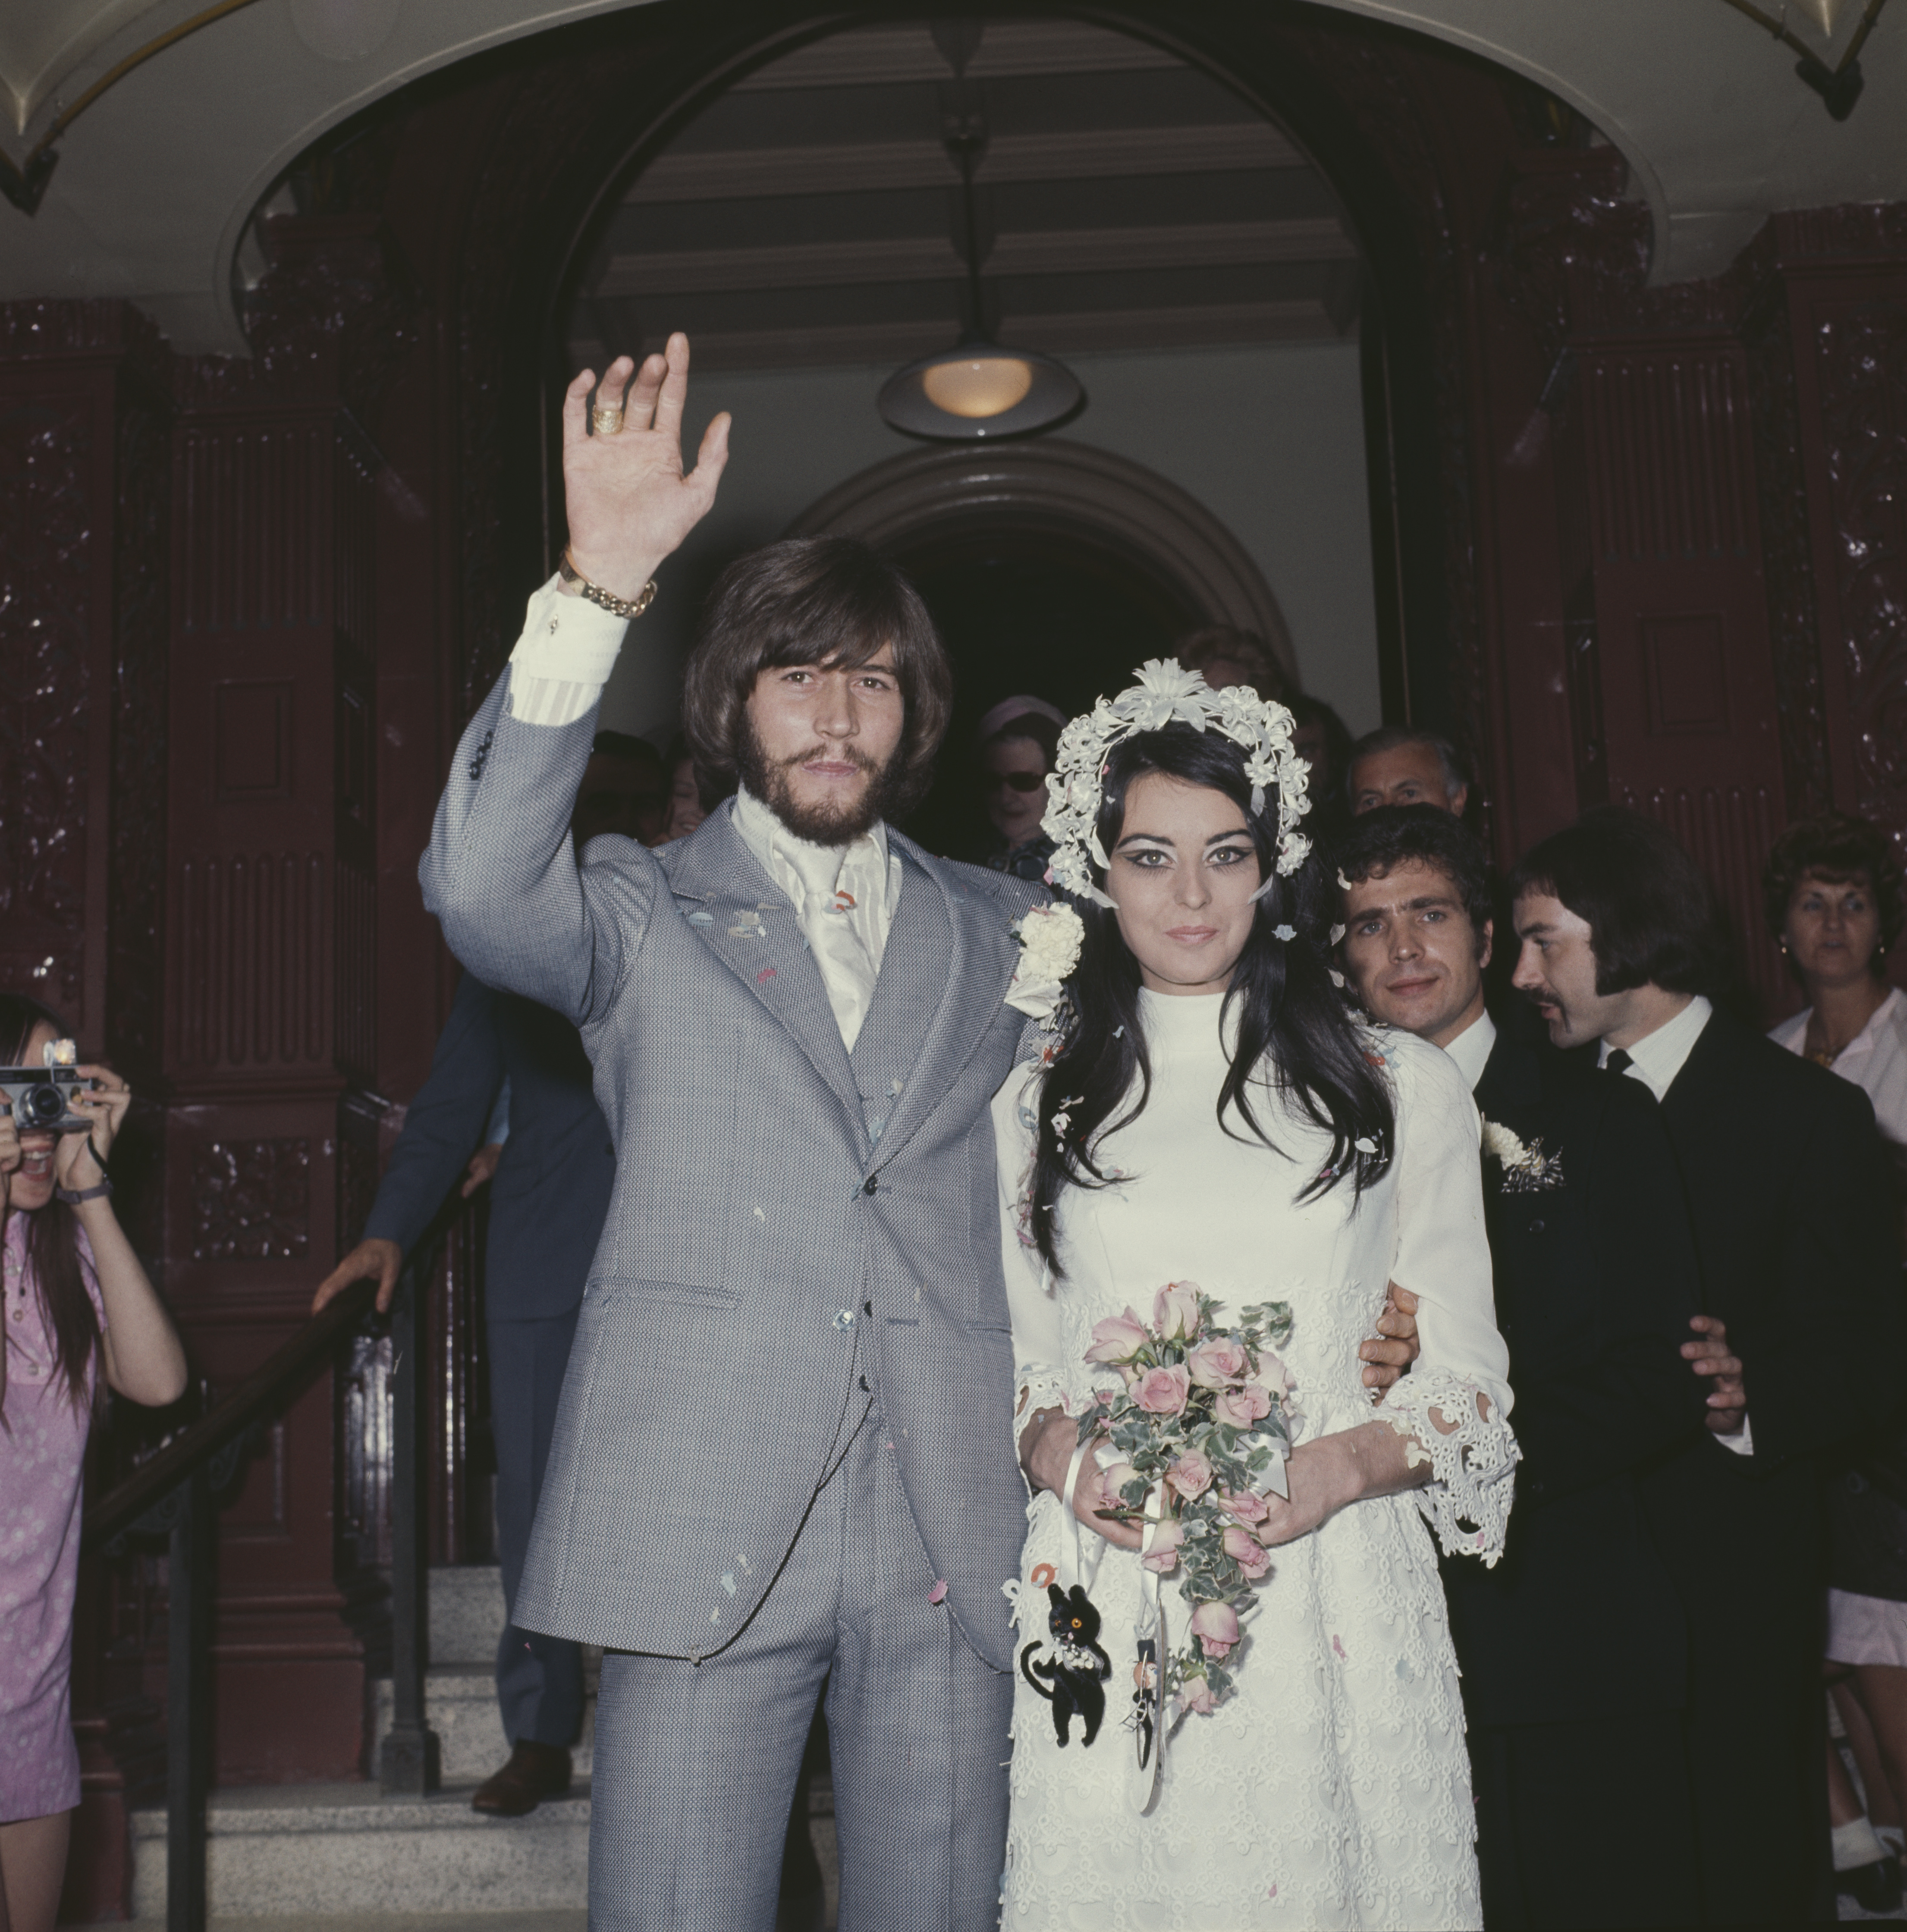 Barry Gibb and Linda Gray pictured on their wedding day in 1970 | Source: Getty Images